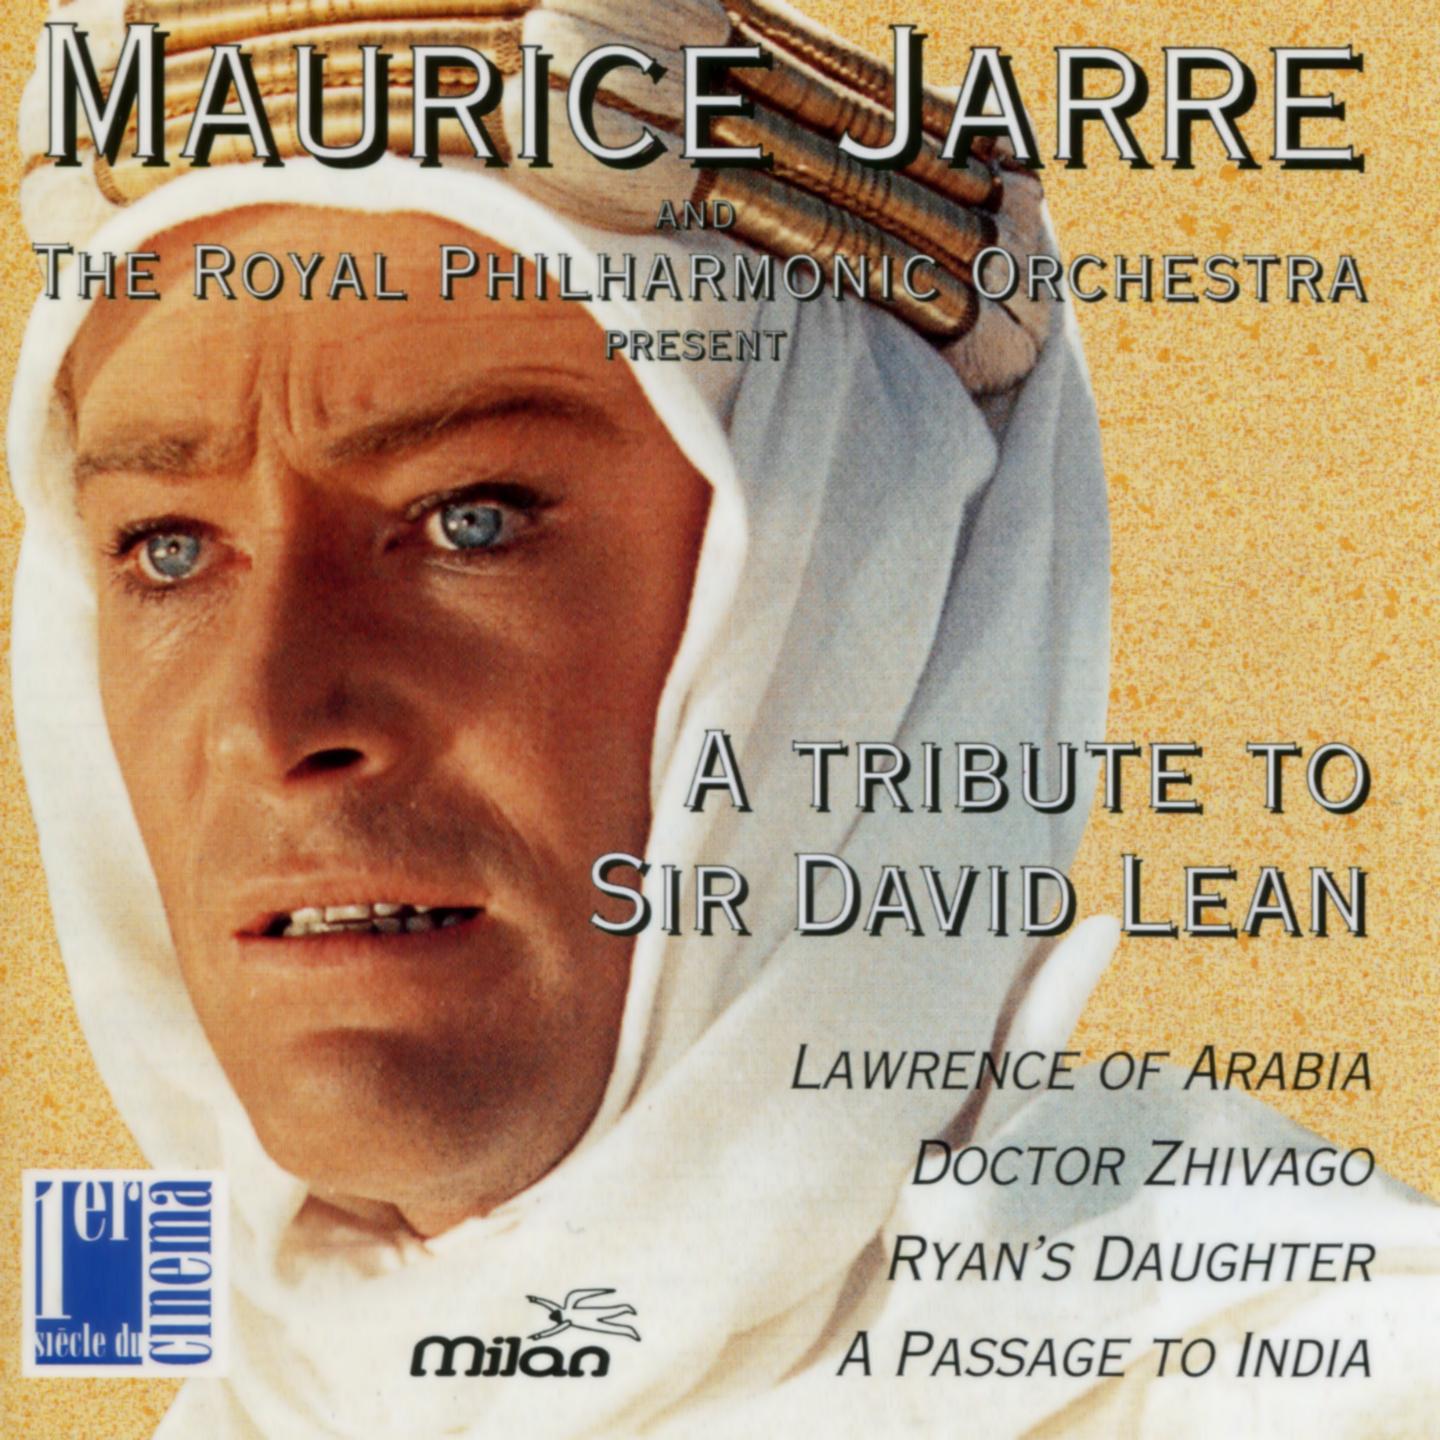 Lawrence of Arabia (Suite from "Lawrence of Arabia")